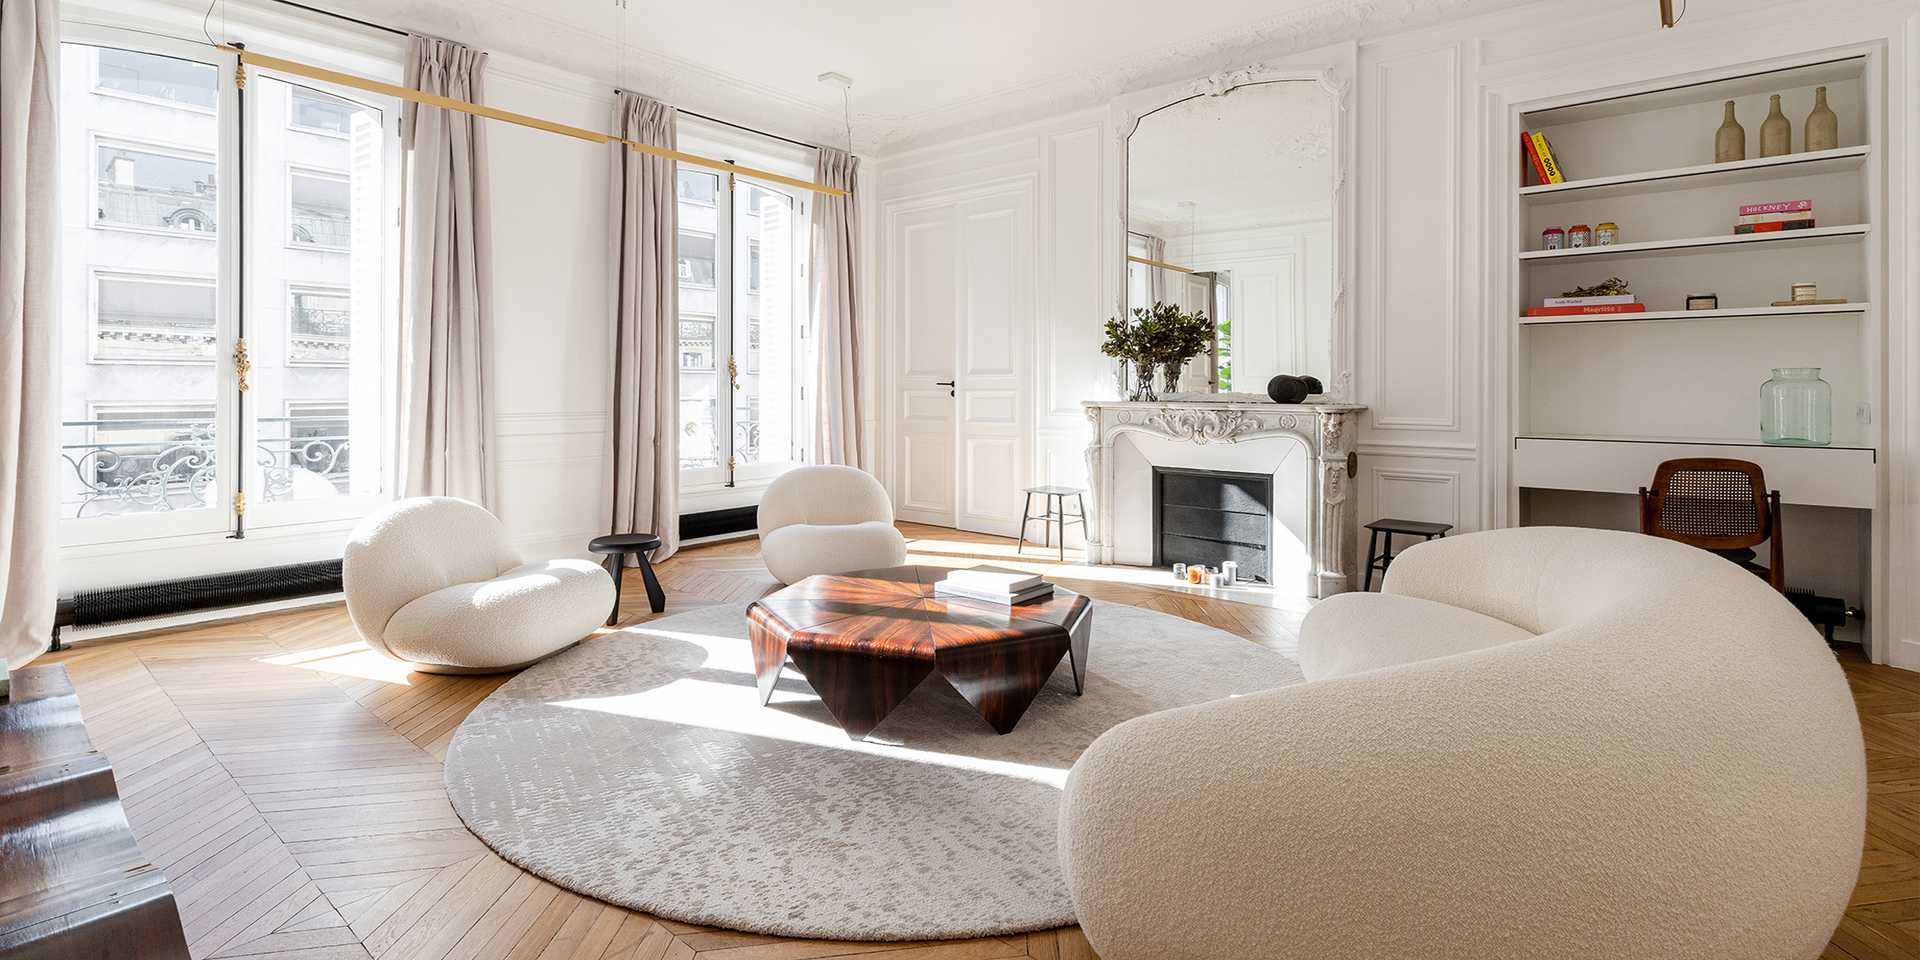 Interior design of an apartement by an architect in Paris